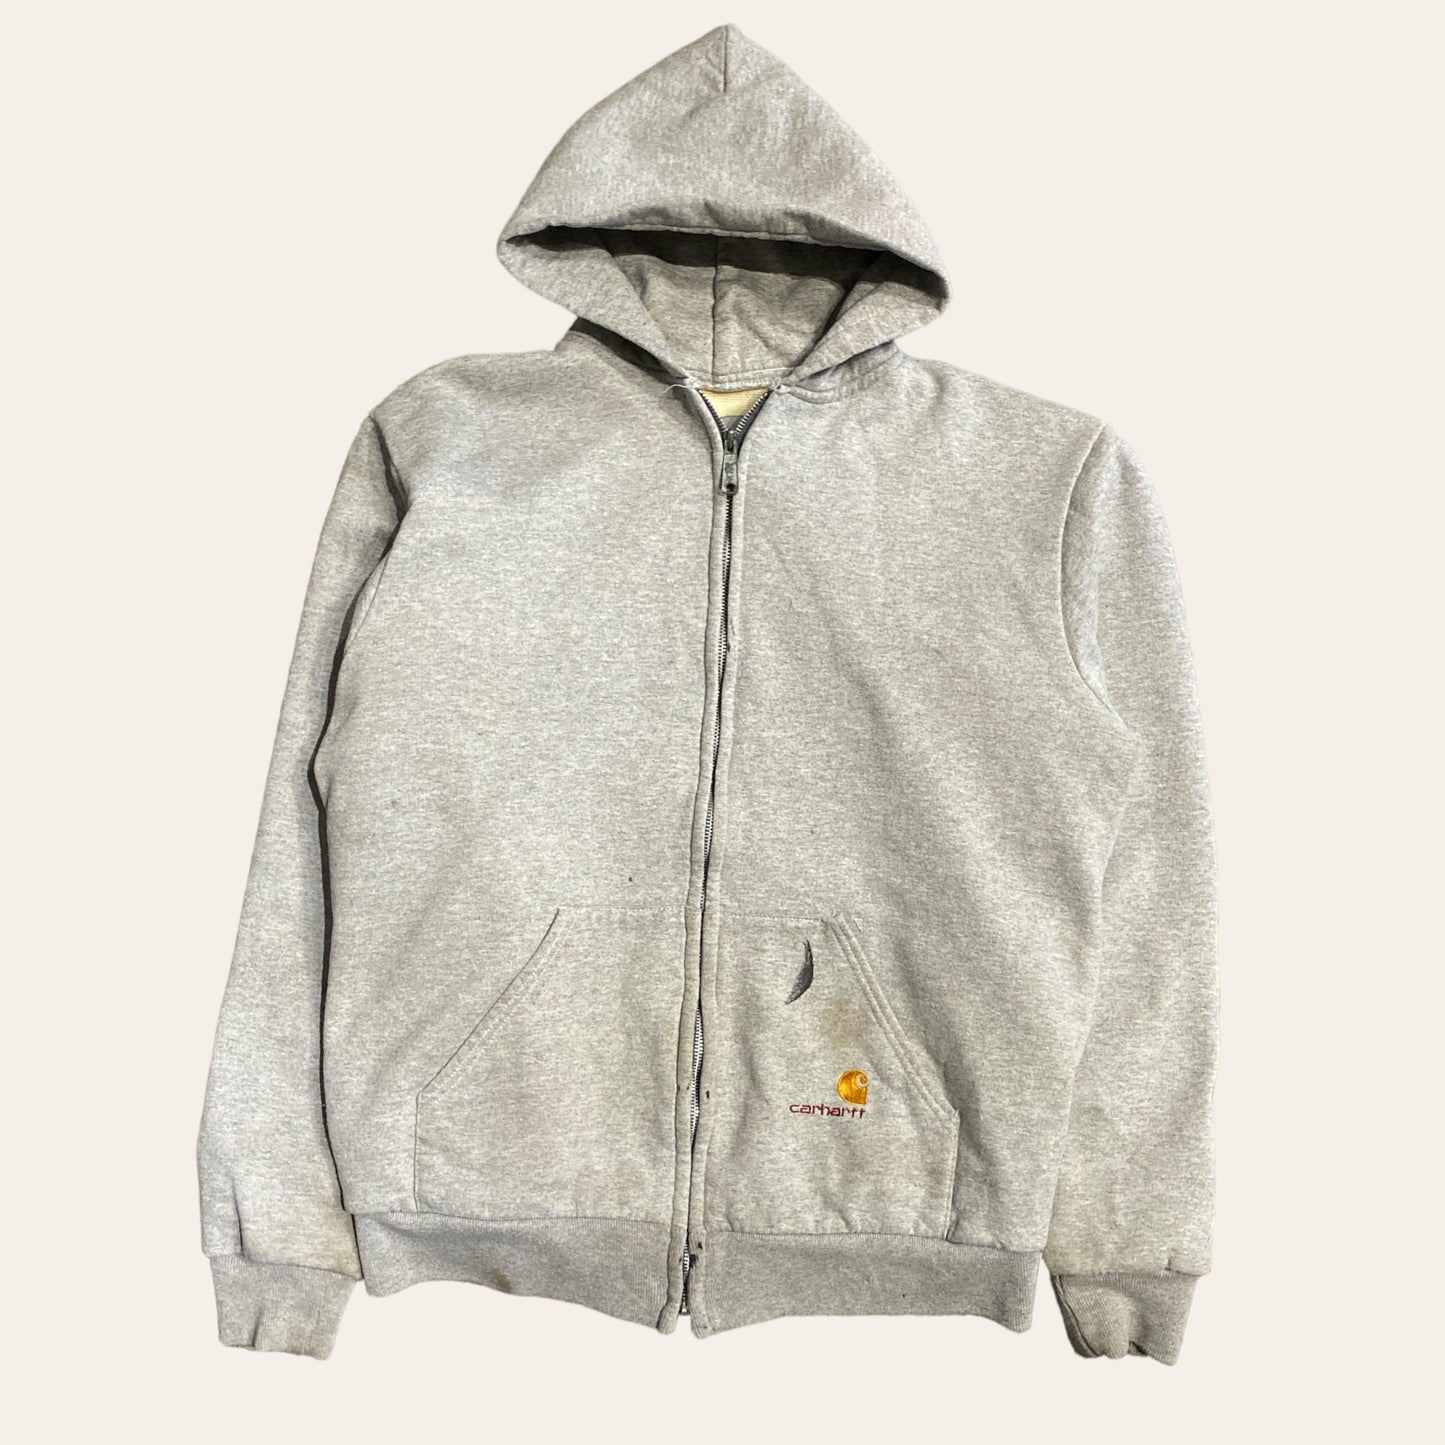 Carhartt Thermal Lined Hoodie Grey Size XL